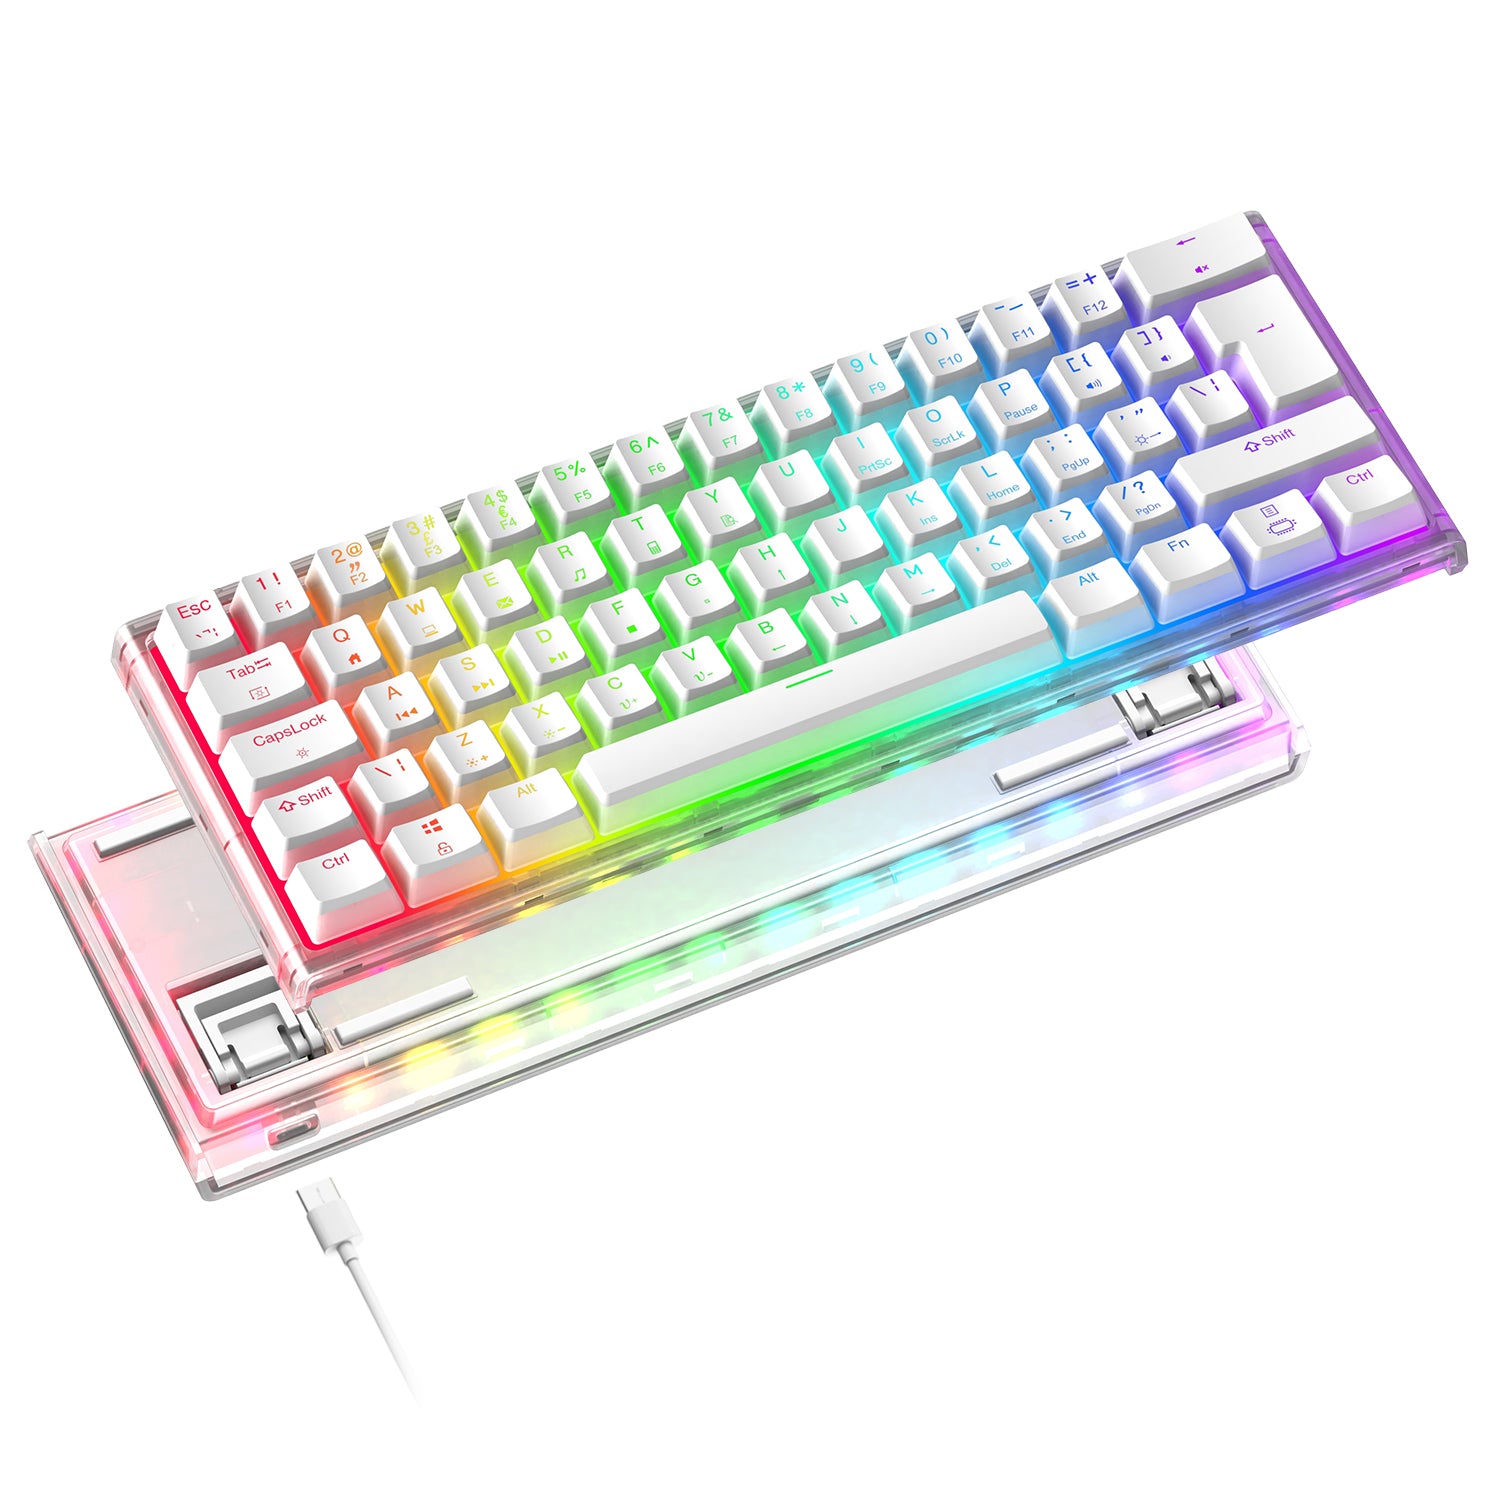 MAGIC-REFINER MK-1 60% Wired Mechanical Gaming Keyboard, PBT Pudding Keycaps, Hot-Swappable, 18 RGB Backlit, Outemu Red Switch, for PC/PS4/Xbox